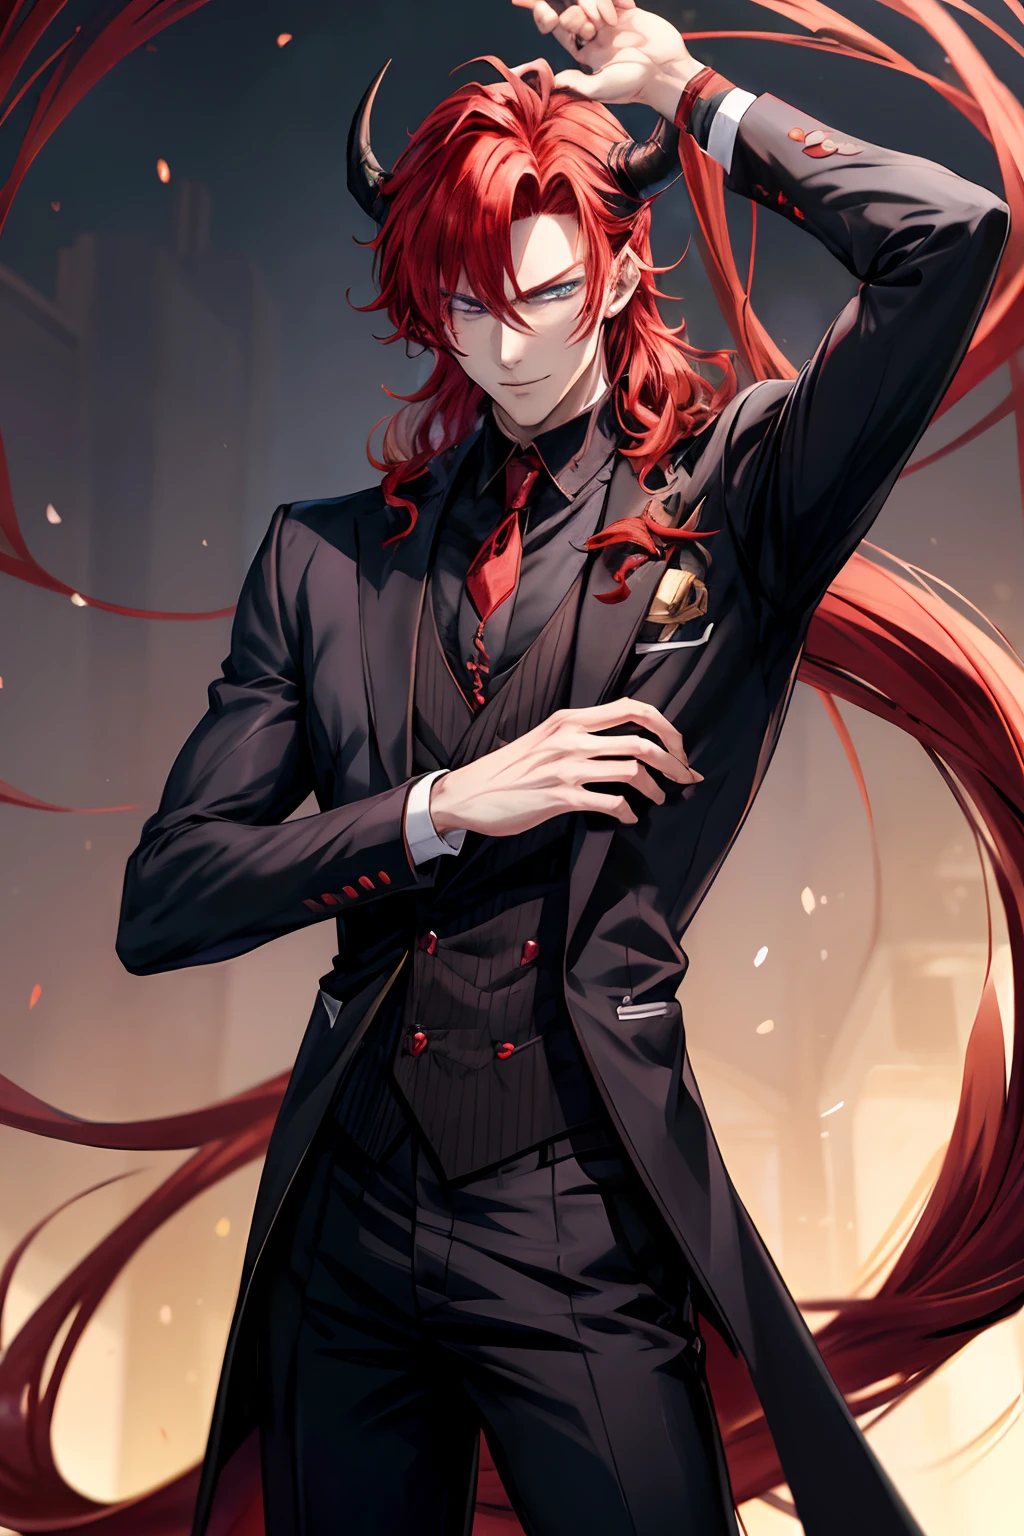 Wolf in Suit in Anime Style Stock Illustration - Illustration of  psychedelic, evil: 275193608